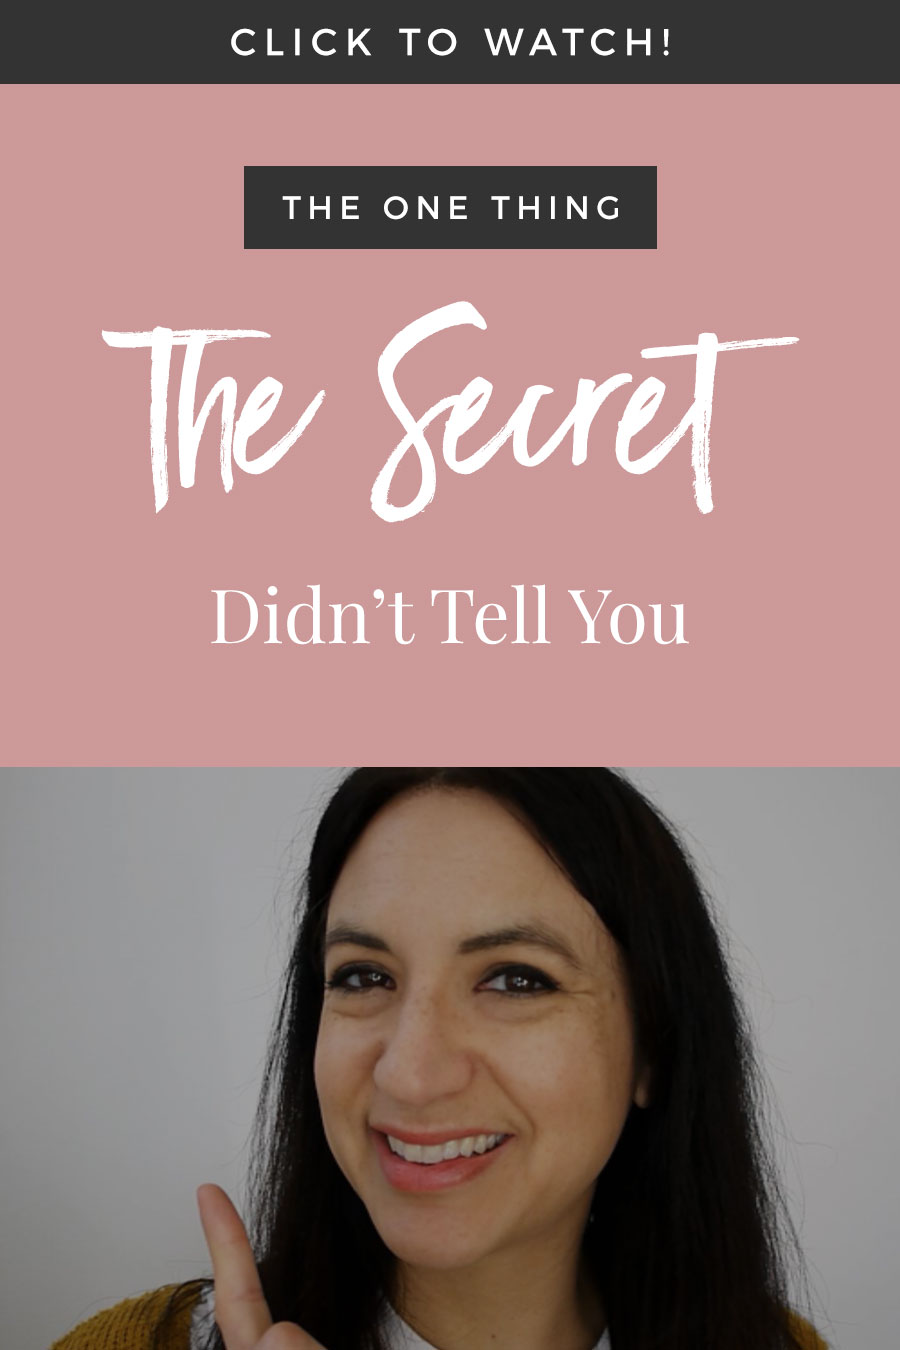 The One Thing The Secret Didn't Tell You